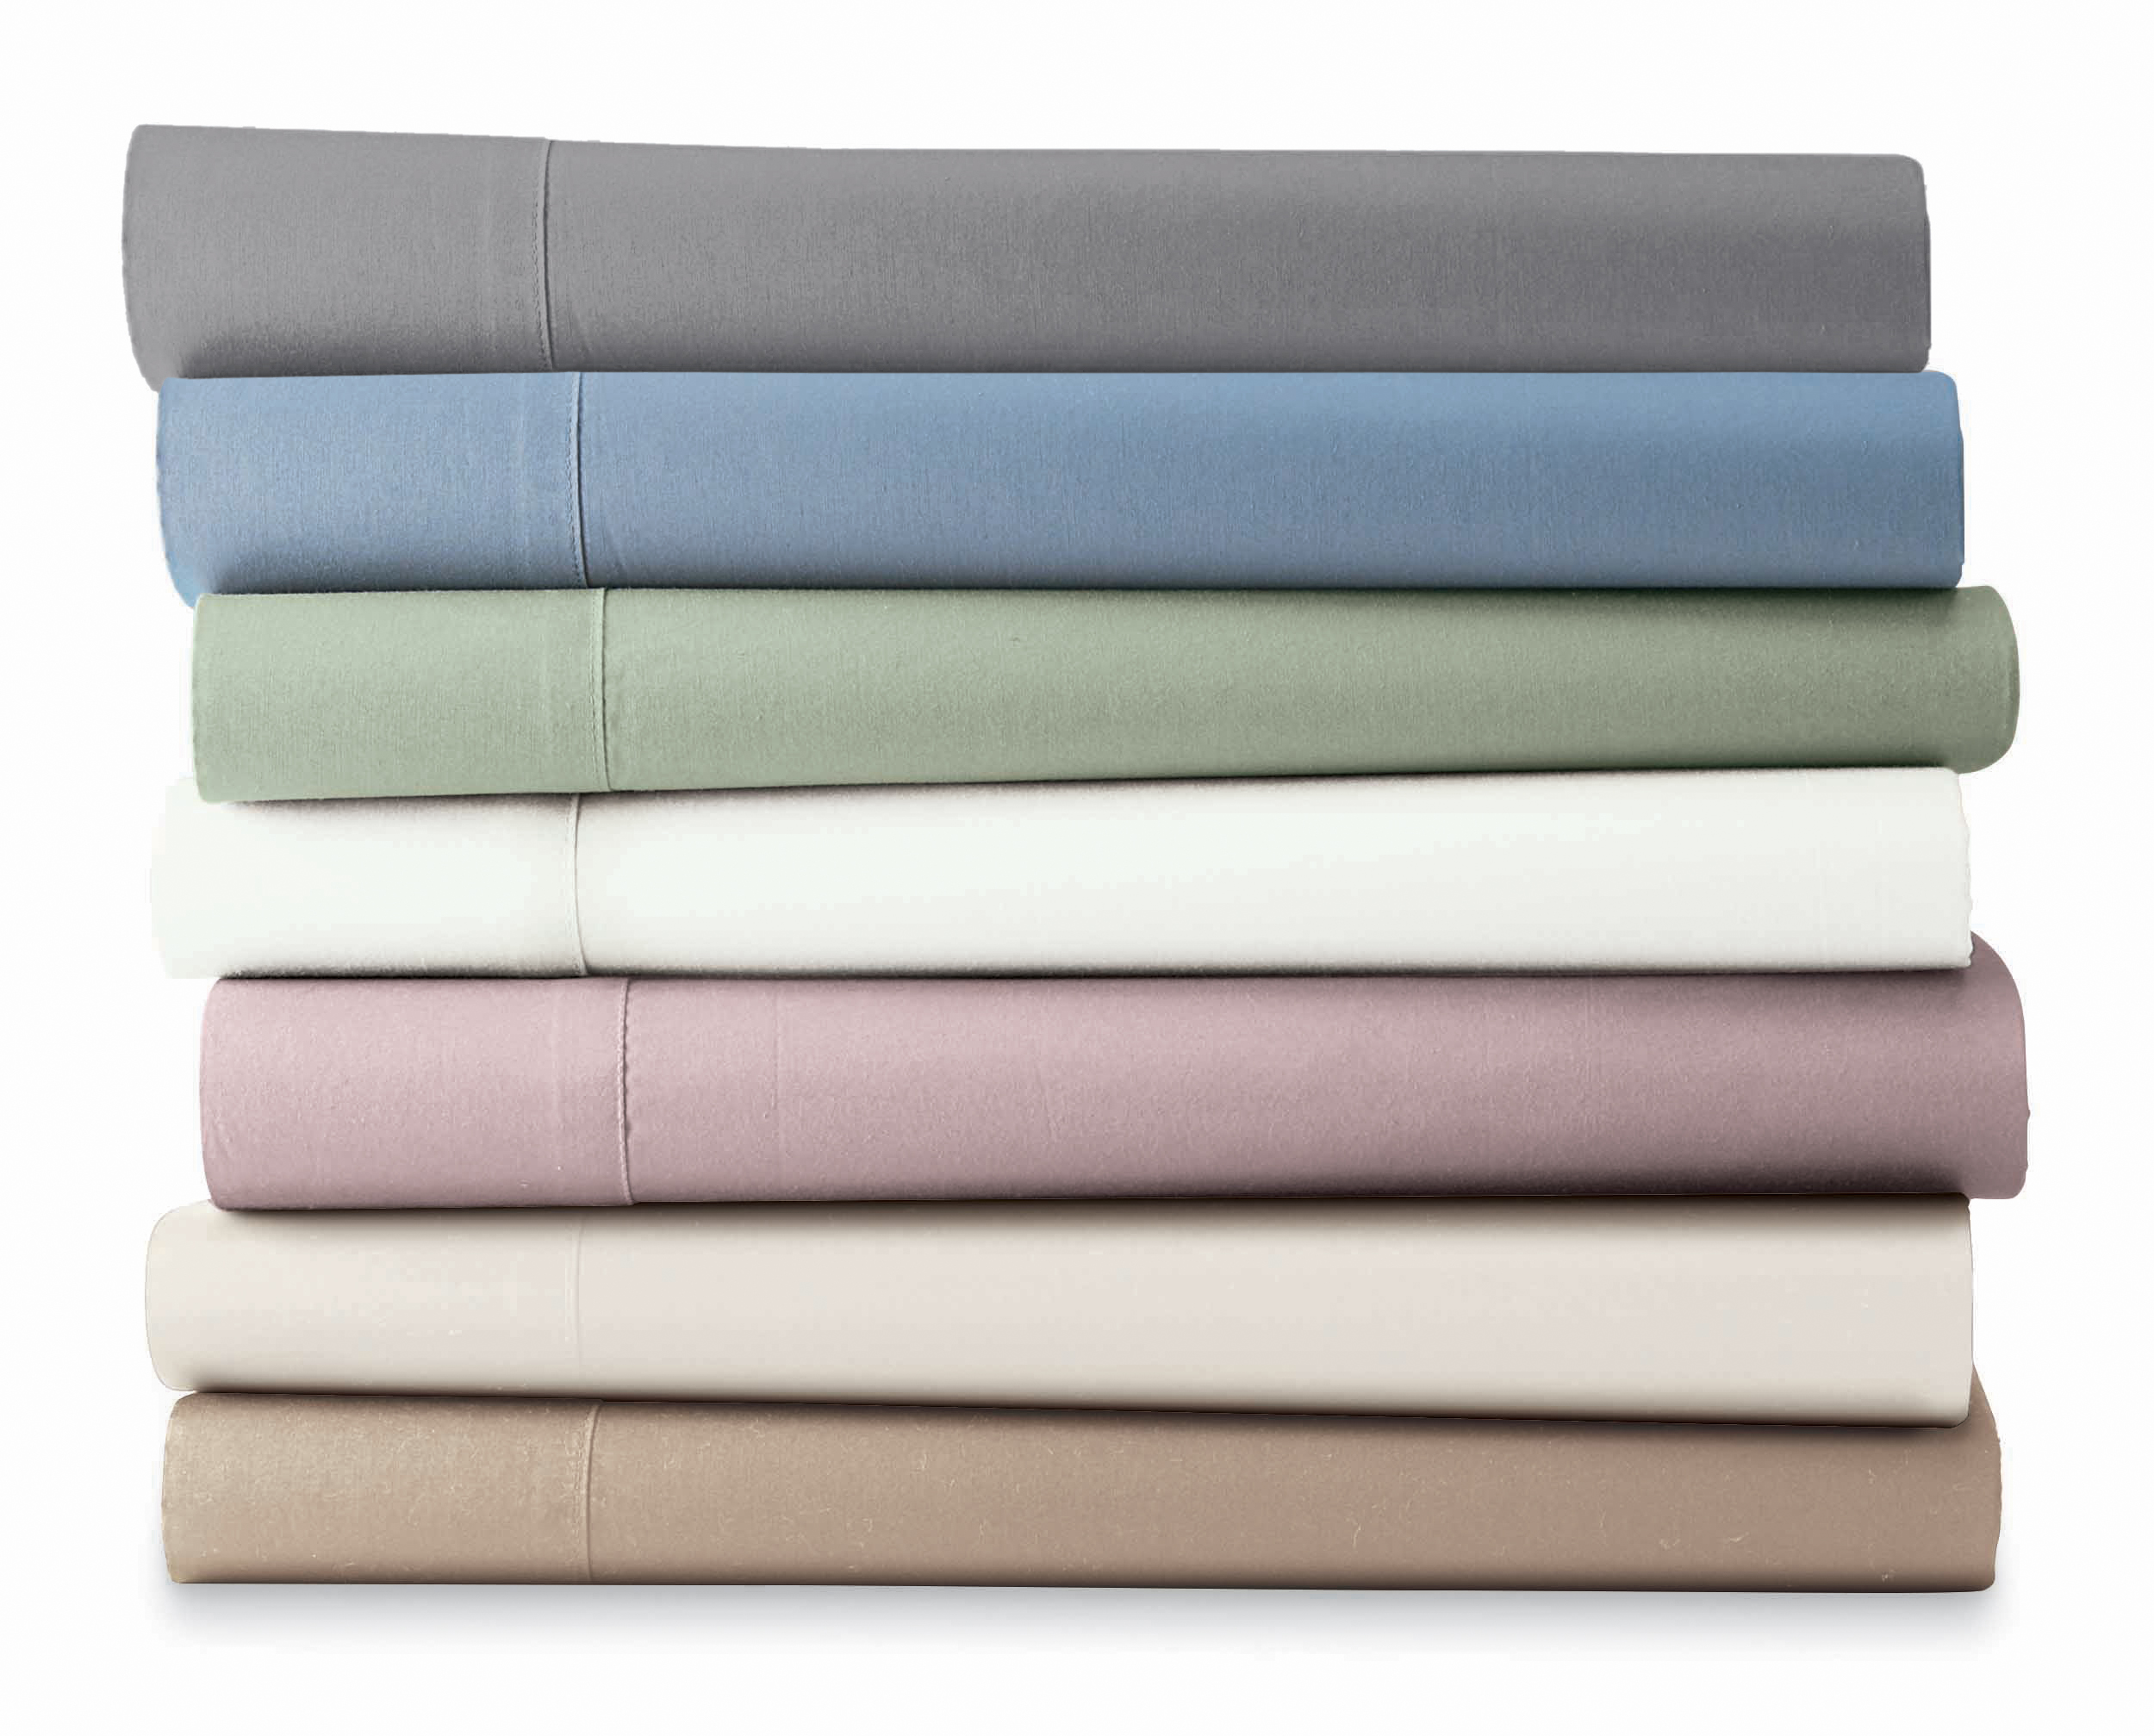 Cannon 300 Thread Count Sheet Sets additional pillowcases sold ...